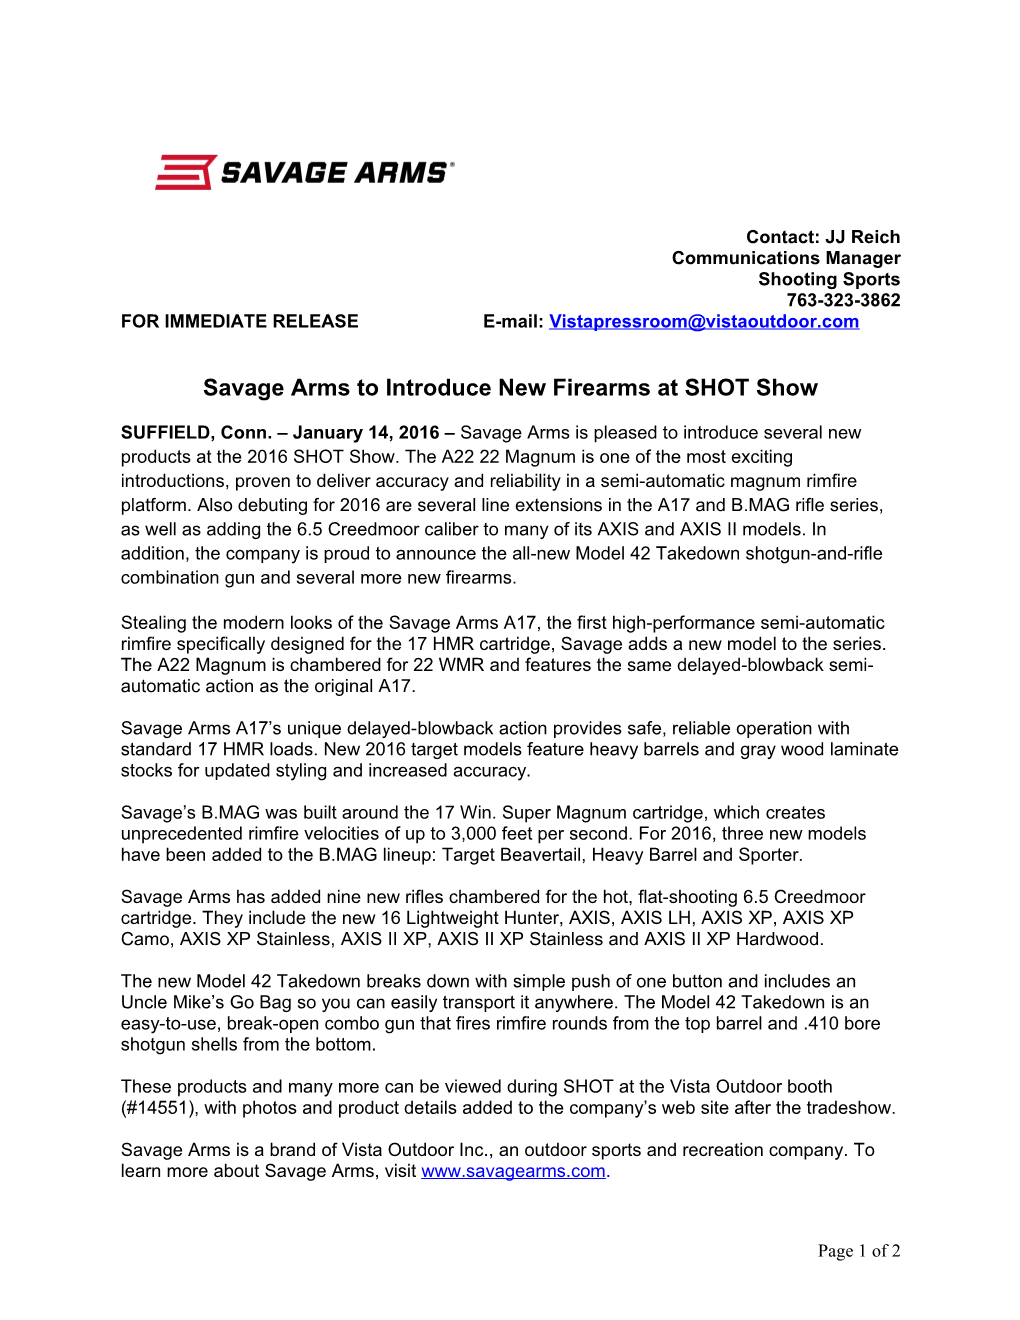 Savage Arms Tointroduce New Firearms at SHOT Show